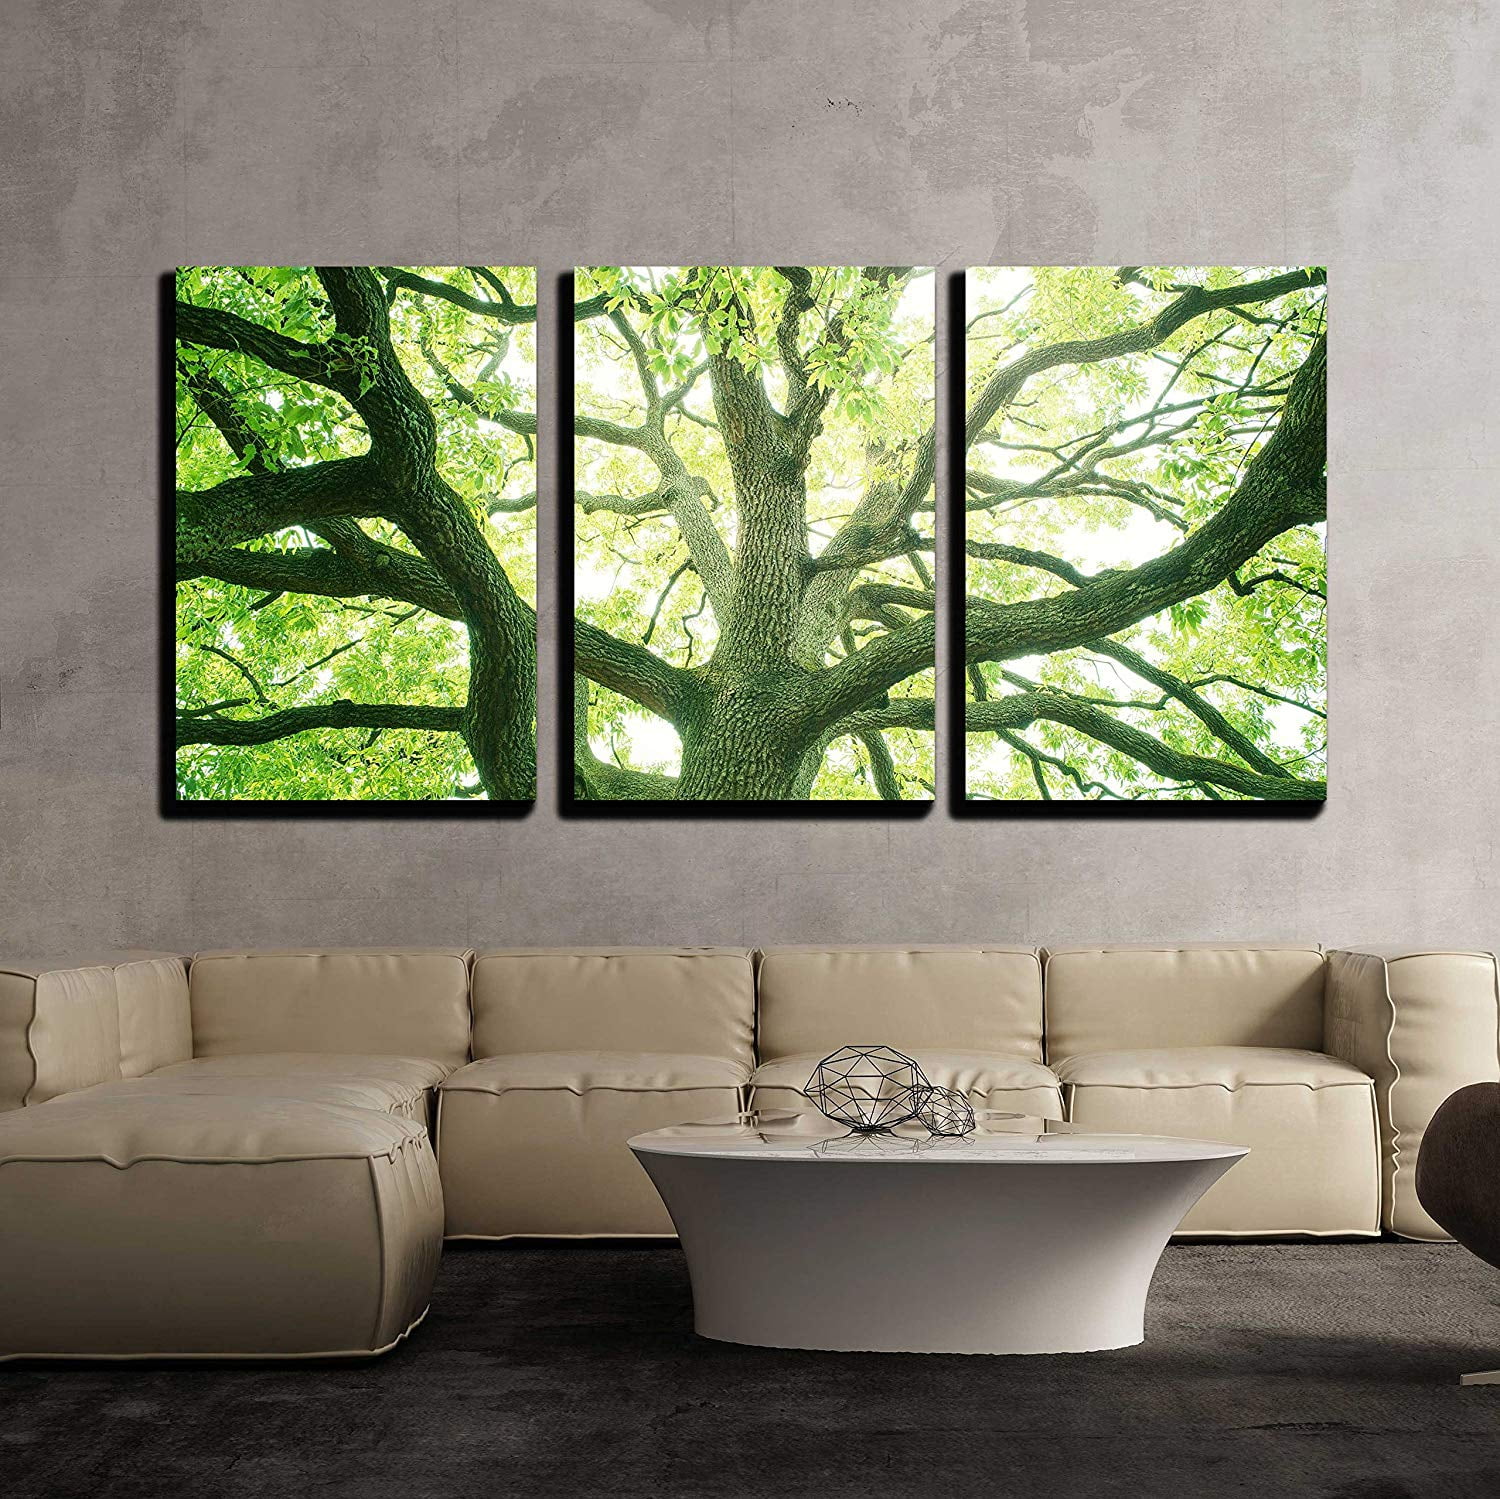 Wall26 3 Piece Canvas Wall Art - Big Tree in a Forest. Fresh Green and